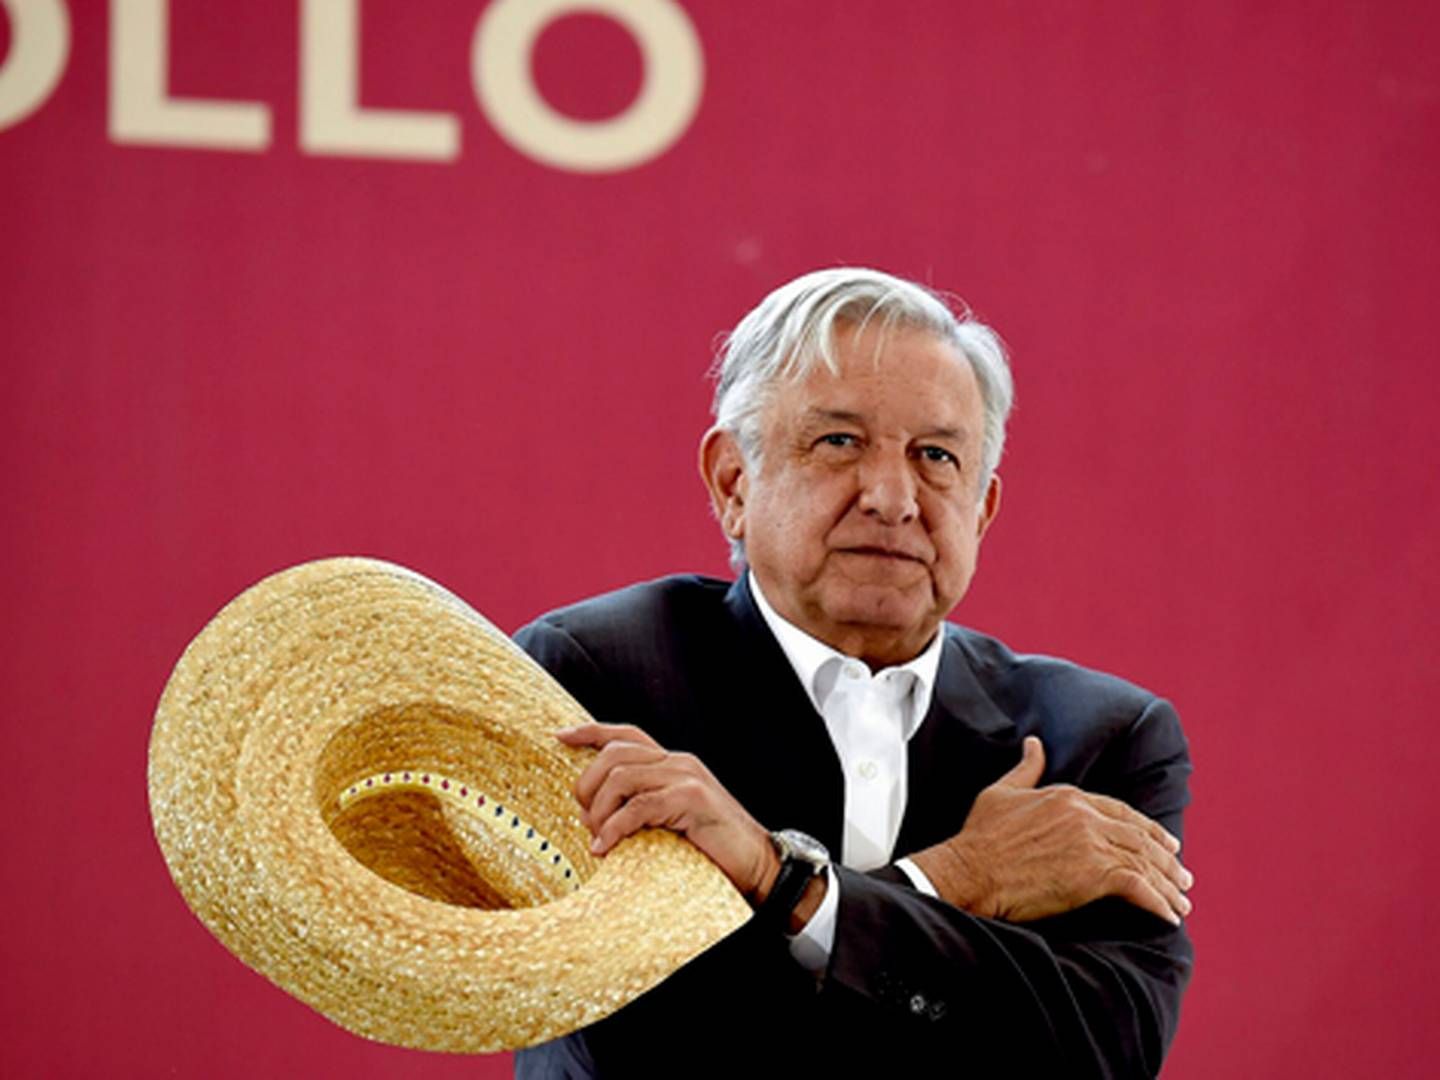 Newly elected Mexican President Andrés Manuel López Obrador wants to remove multinational companies from the country's energy sector | Photo: Ritzau Scanpix/Alfredo Estrella